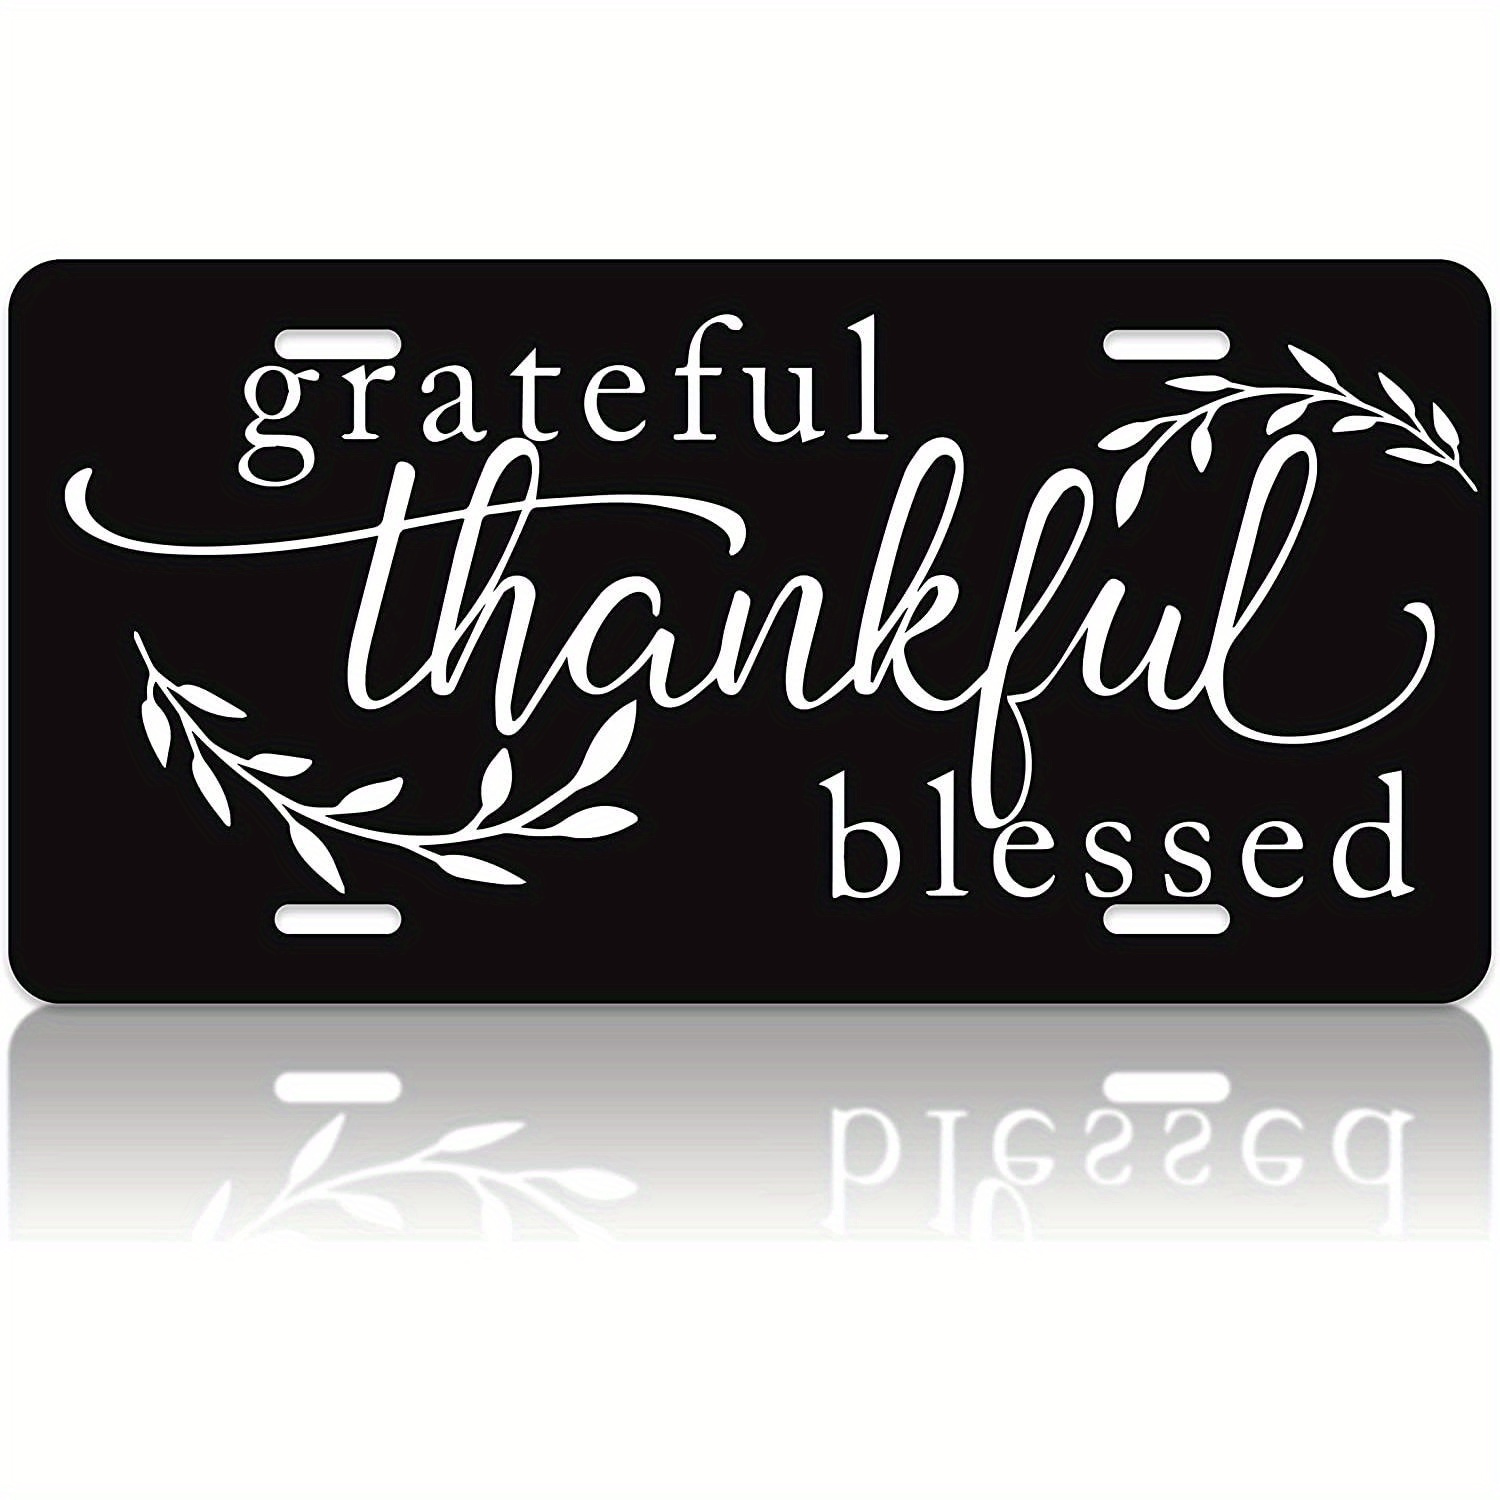 

Grateful Thankful Blessed Pattern Aluminum Metal License Plate Car Tag Novelty 6x12 Inch